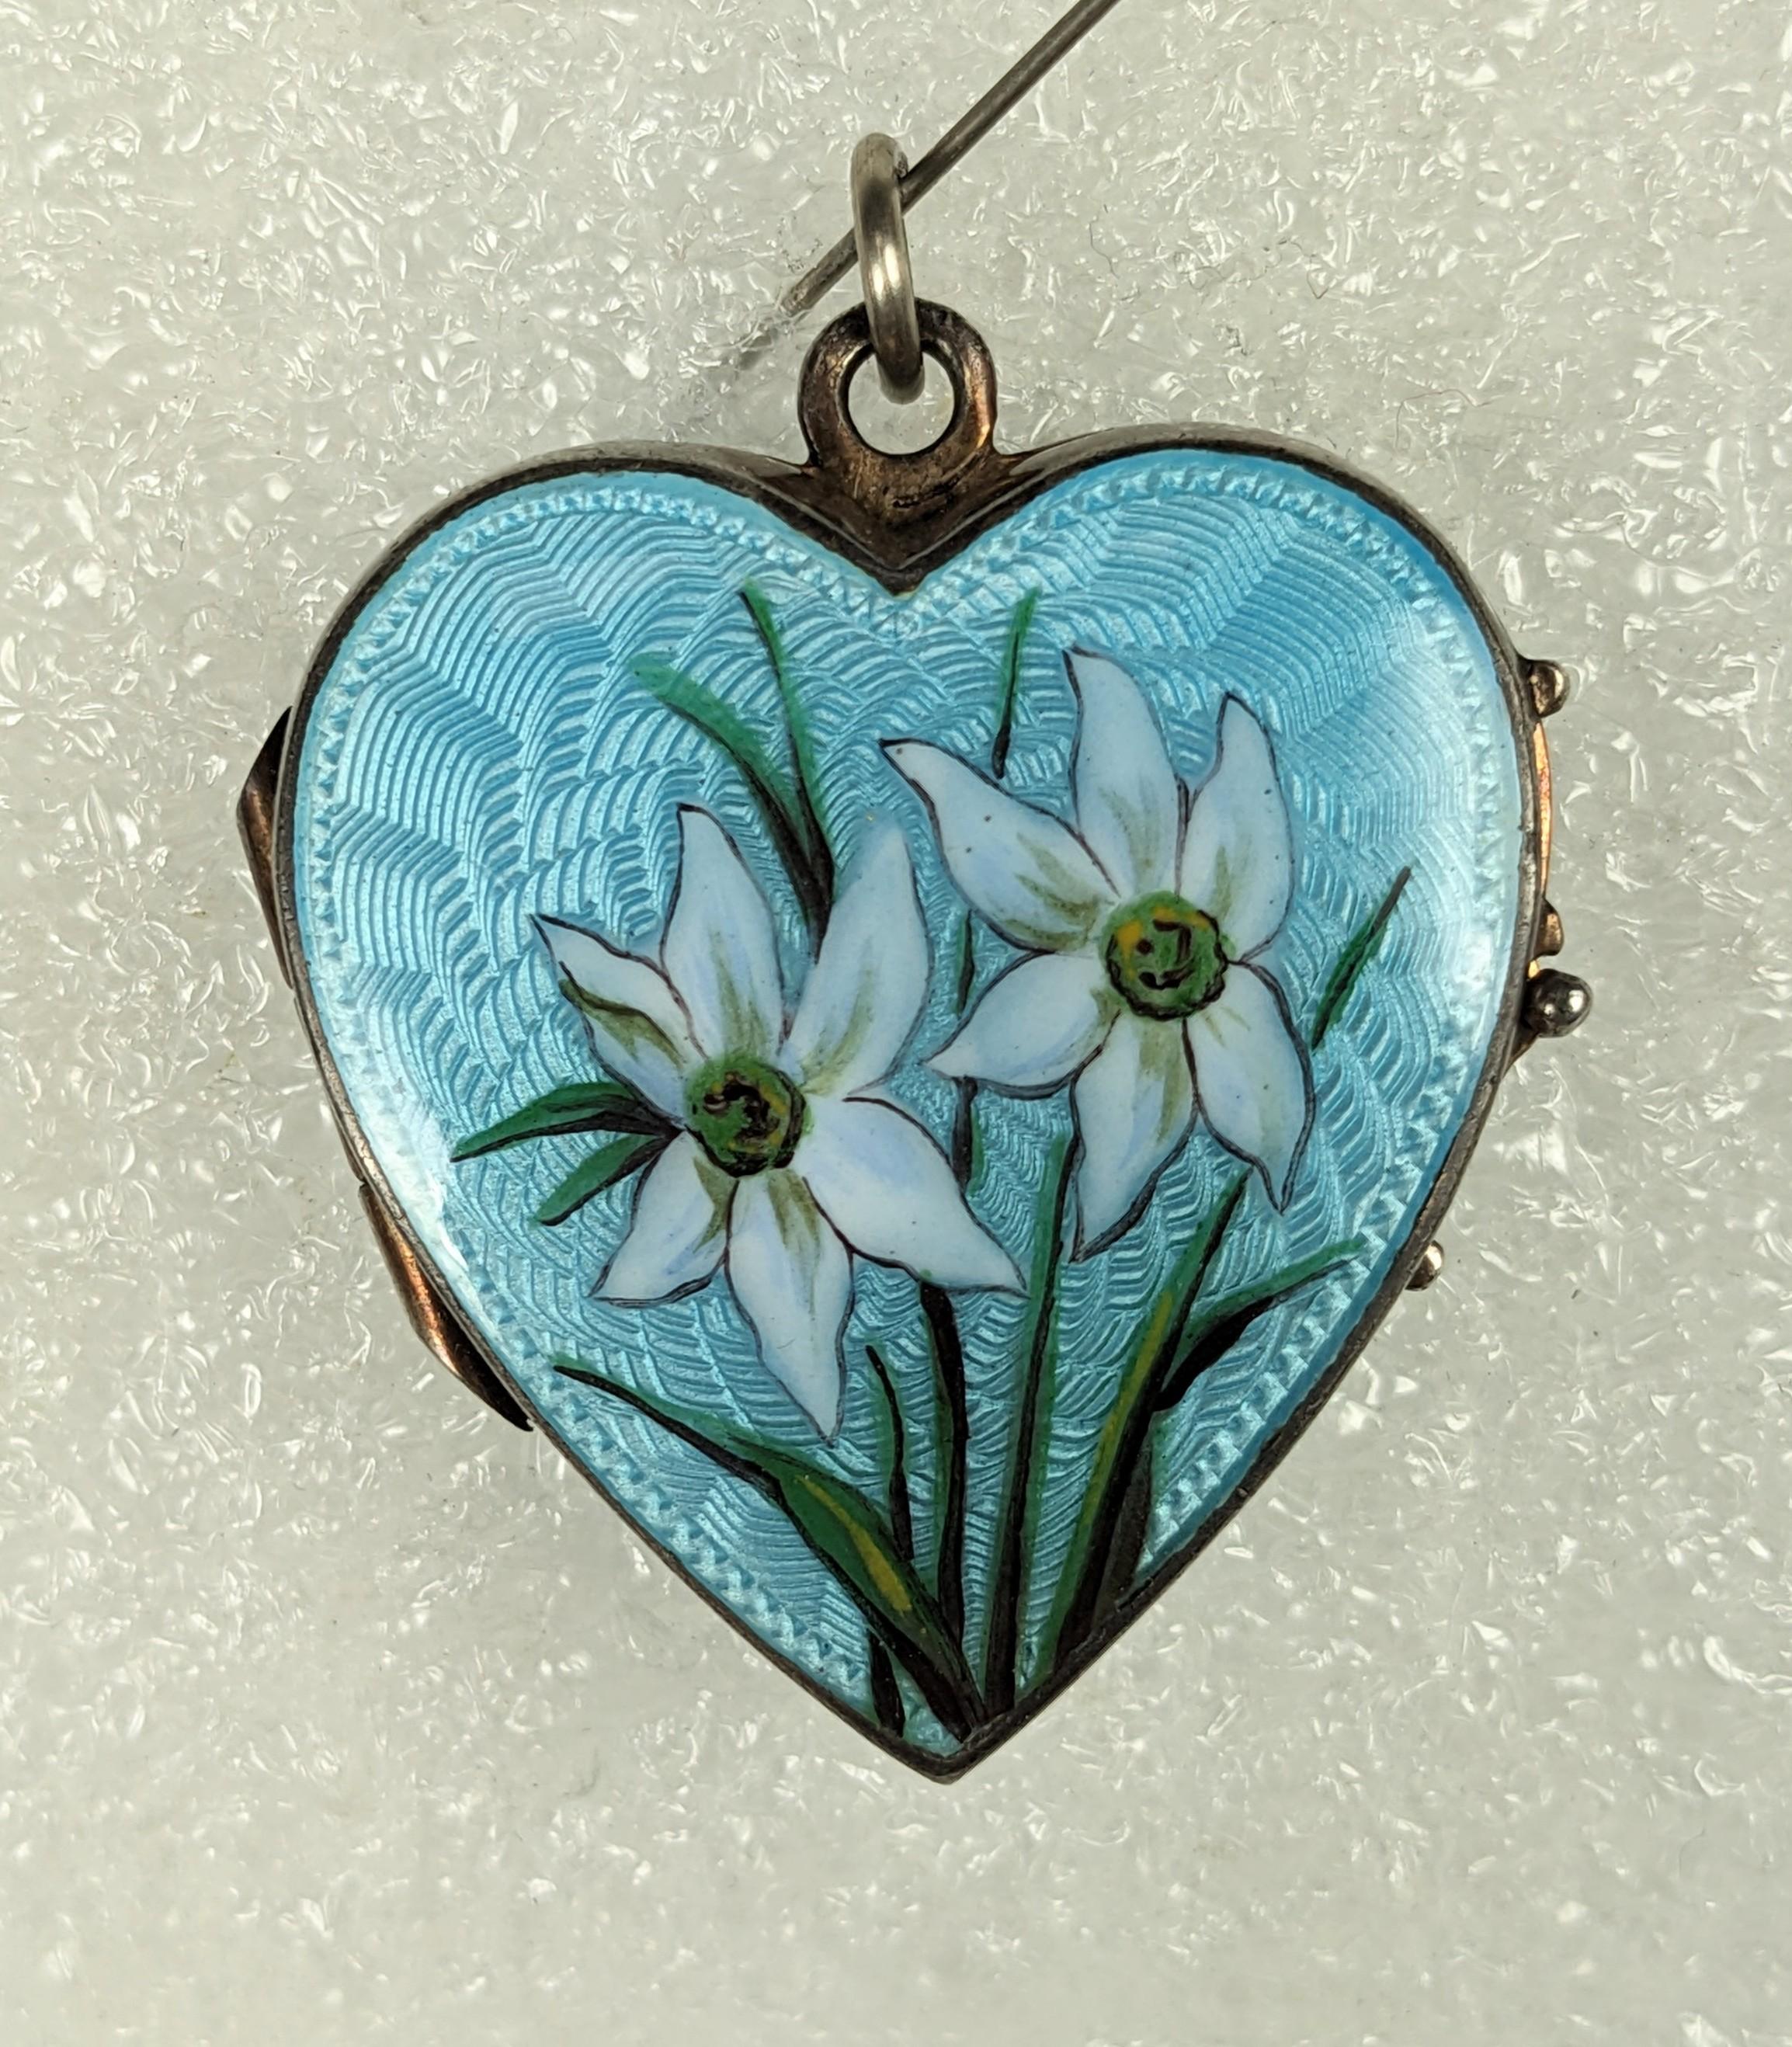 Lovely Antique Silver and Enamel Edelweiss Locket from the 1930's. Beautiful quality with aquamarine blue guilloche enamel on front and back. The face is decorated with hand painted edelweiss blooms. Double locket interior inserts are original. 1